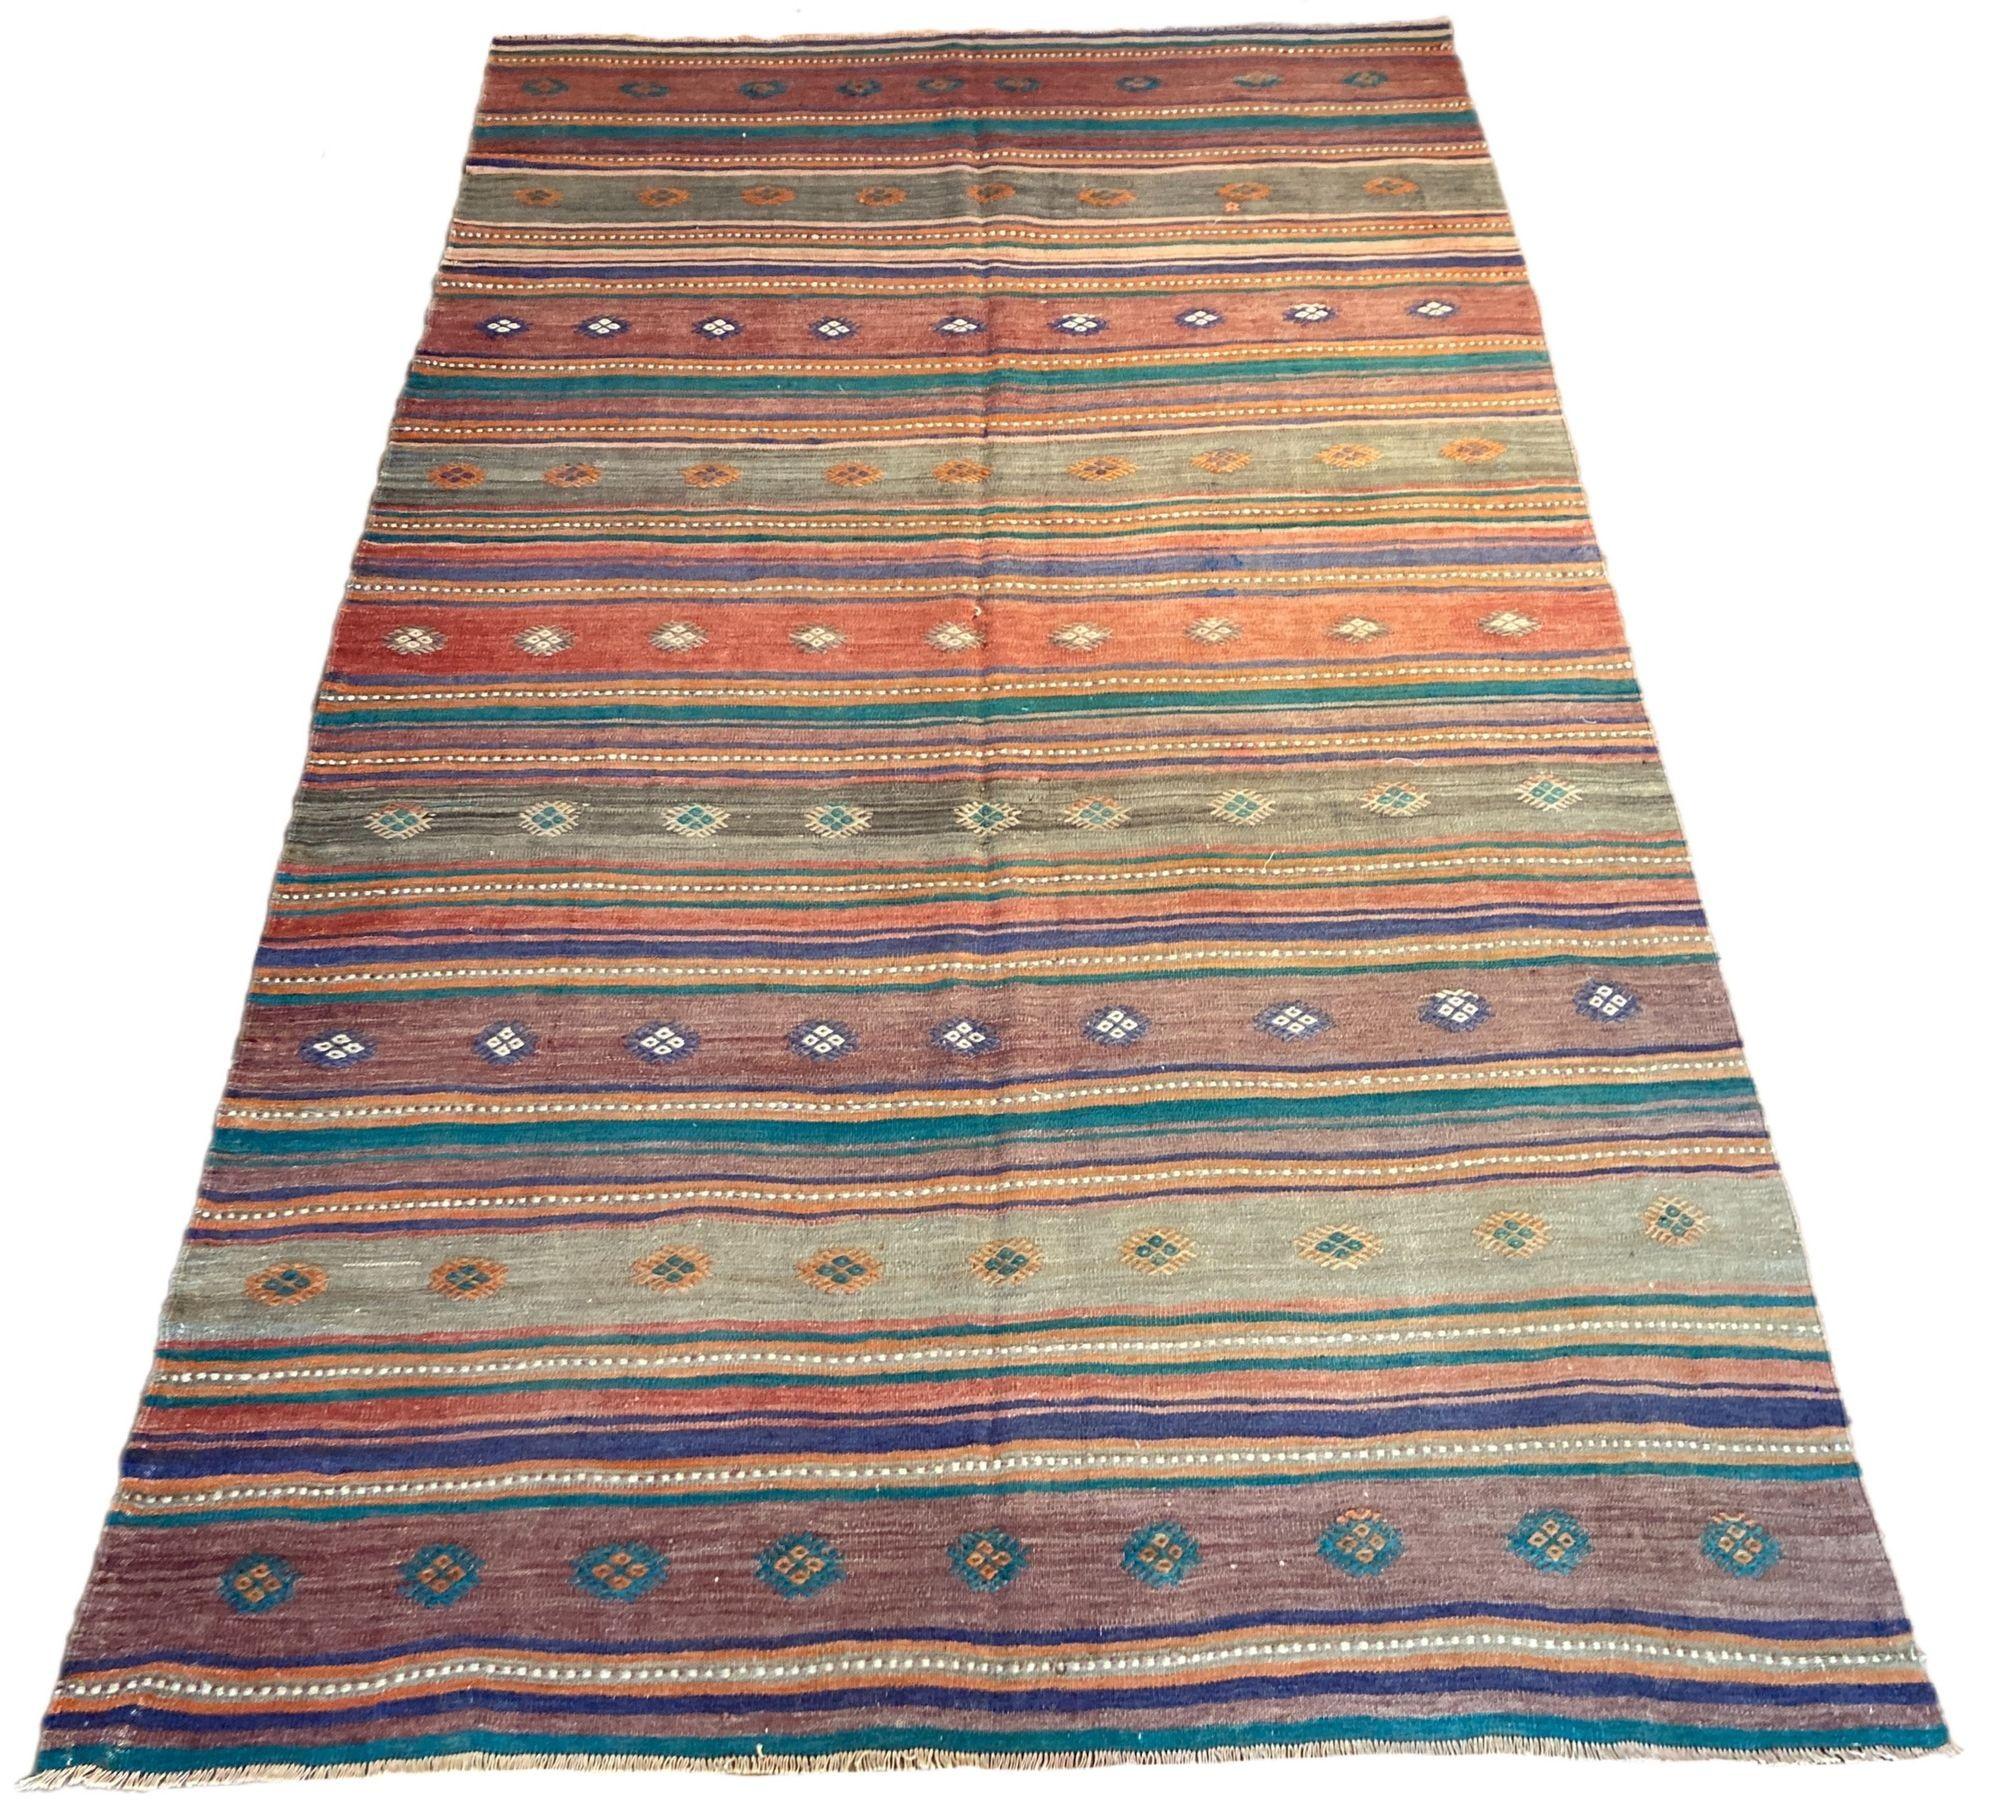 A beautiful vintage kilim, handwoven in central Turkey circa 1960 featuring a multicoloured banded design in aubergine, terracotta and turquoise.
Size: 3.38m x 1.98m (11ft 1in x 6ft 9in)
This kilim is in good condition with light, age related